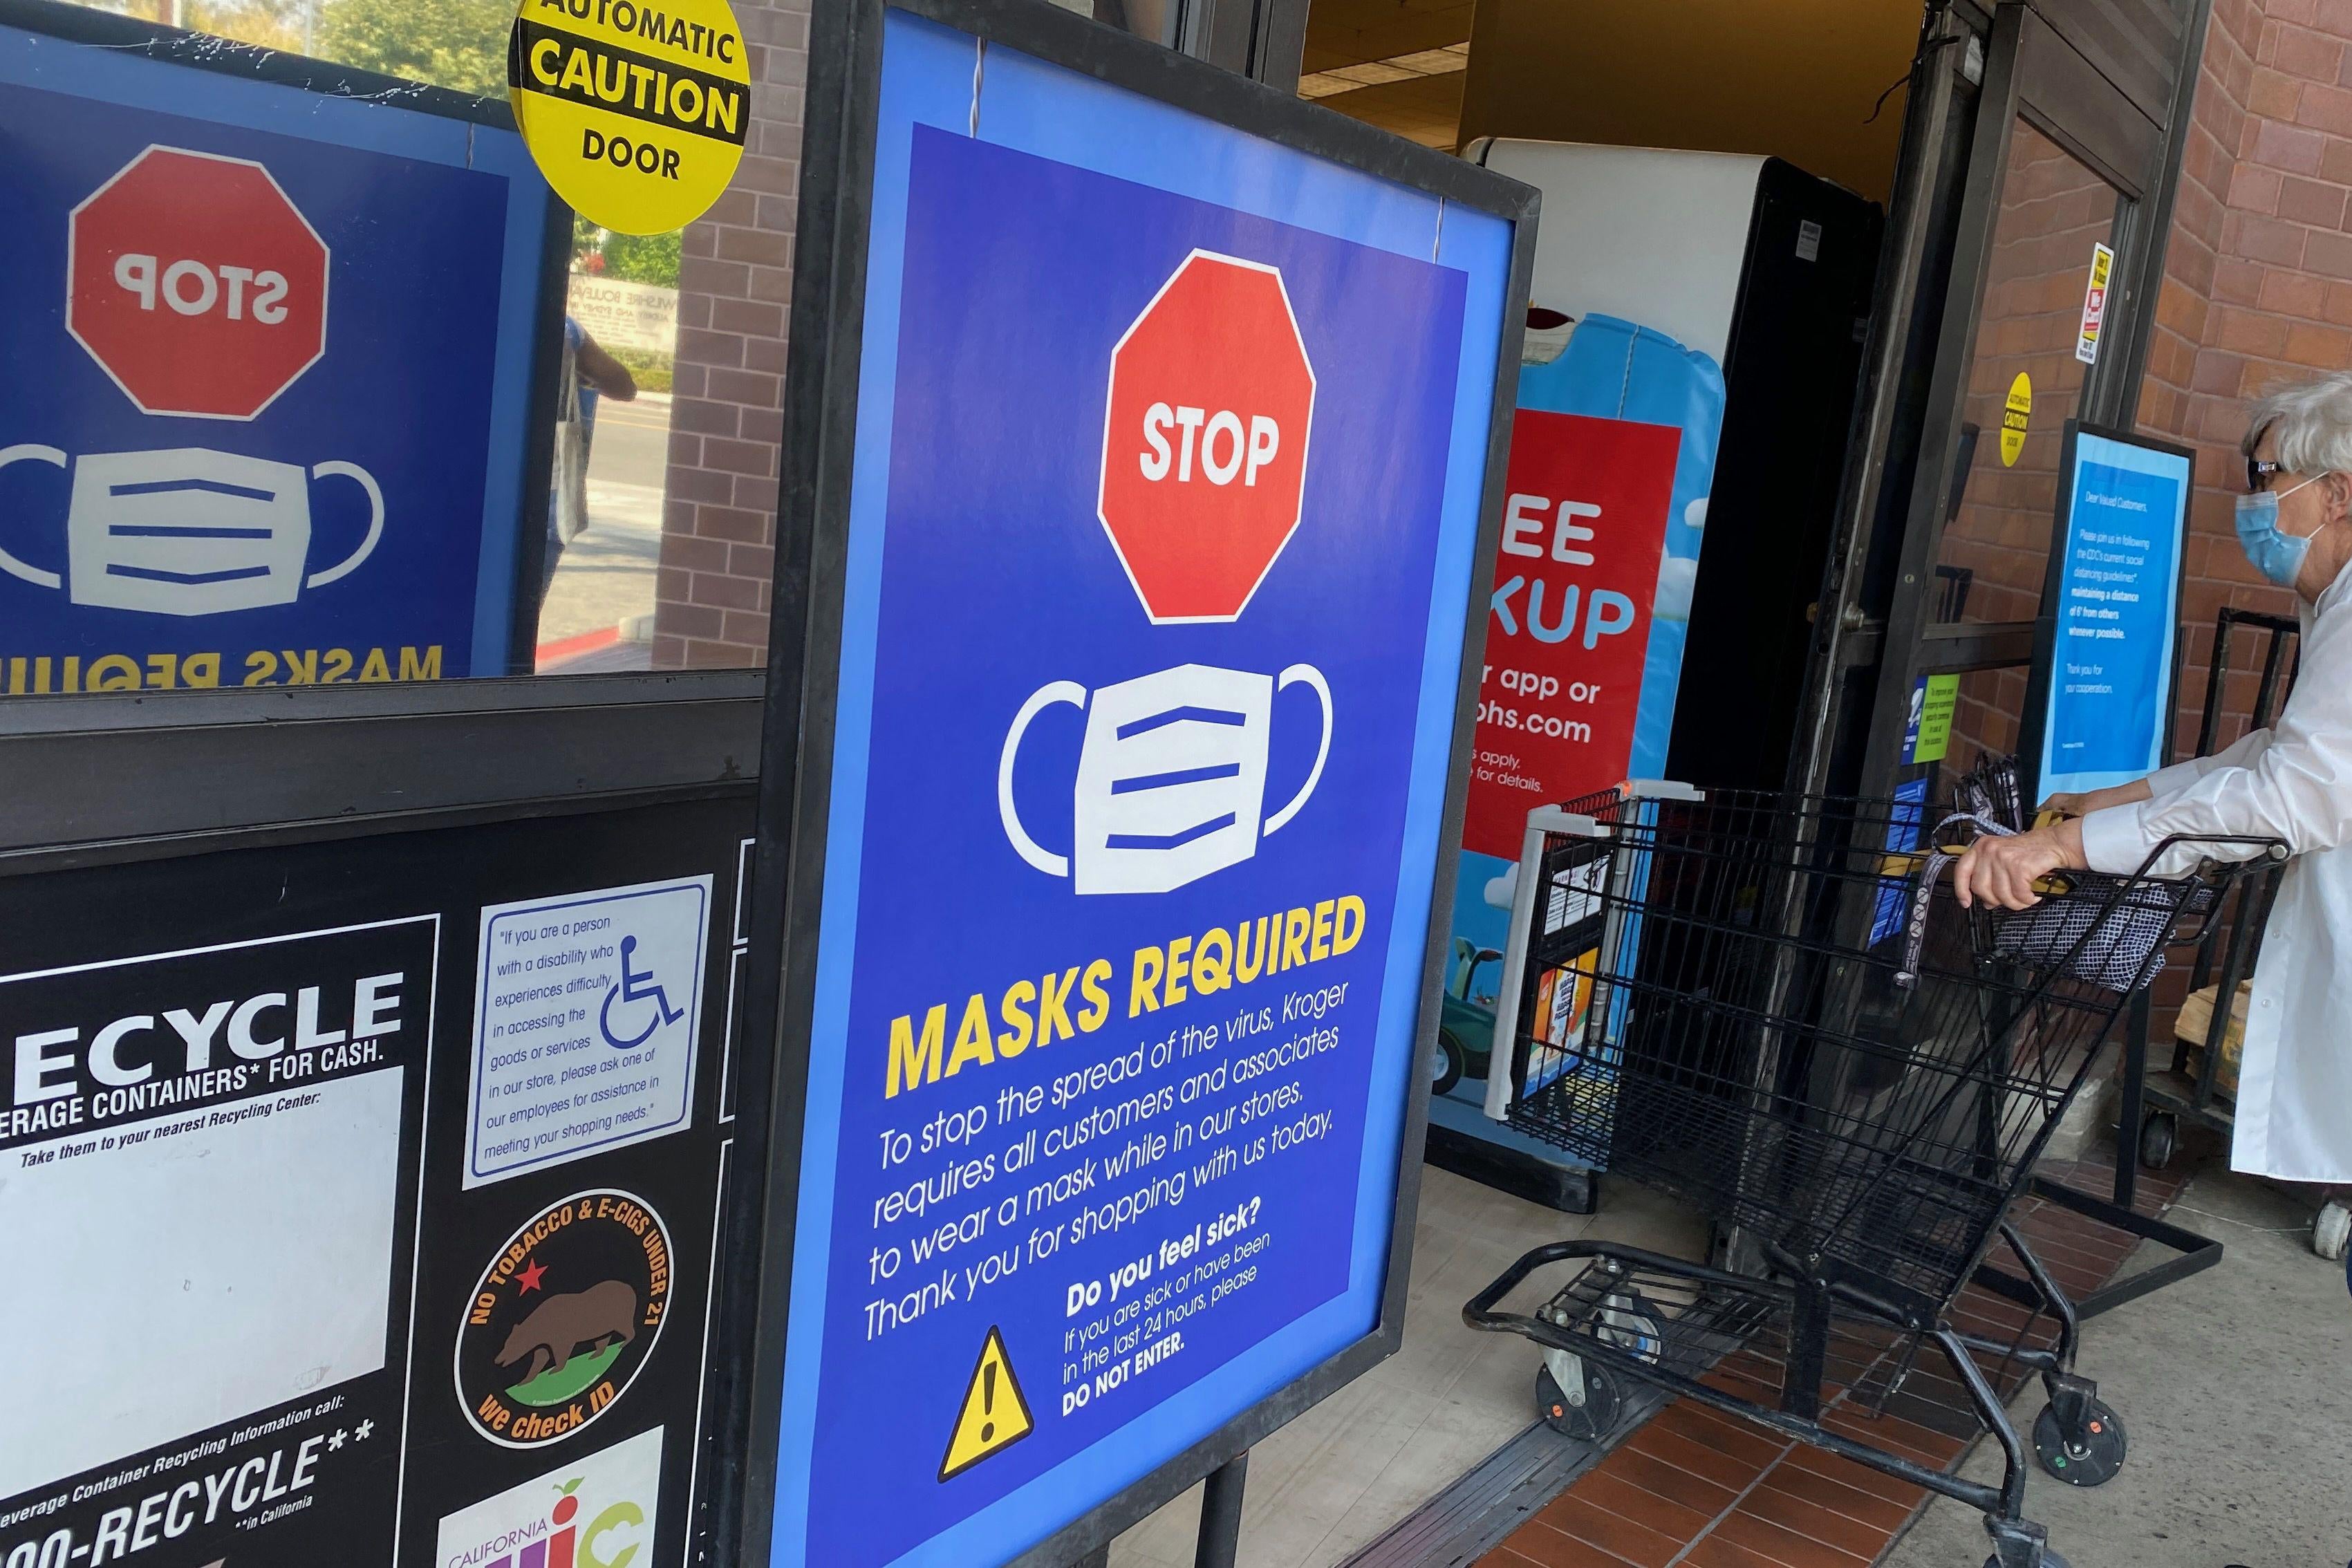 A shopper with a cart enters a store where it says, "Mask required" outside the doors.